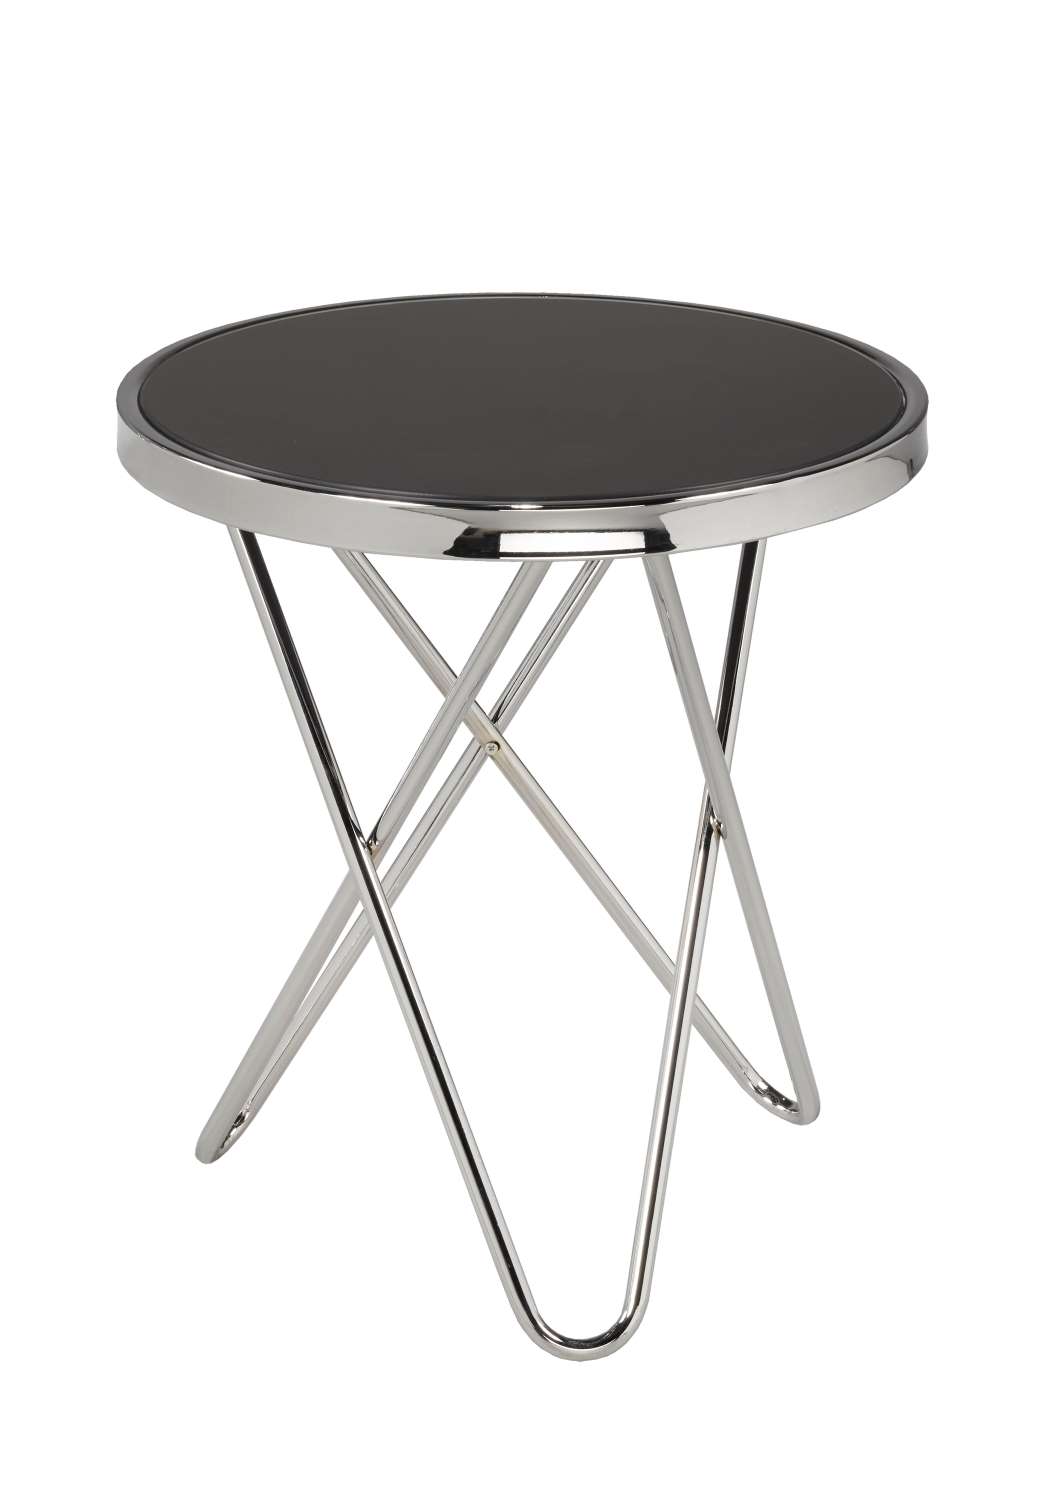 Mina Accent Table - Black and Silver